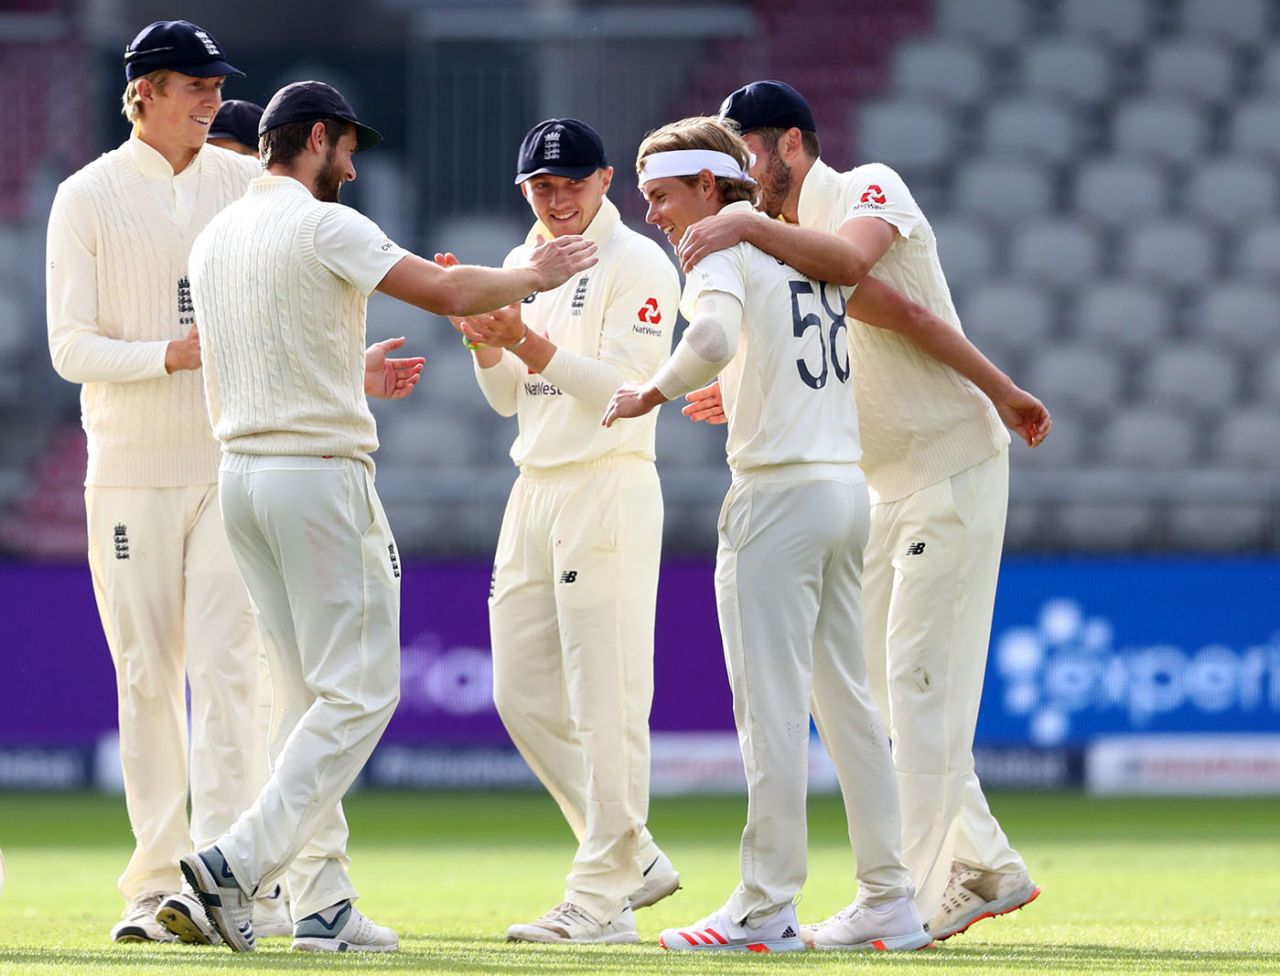 Sam Curran celebrates the early breakthrough, England v West Indies, 2nd Test, Emirates Old Trafford, 2nd day, July 17, 2020